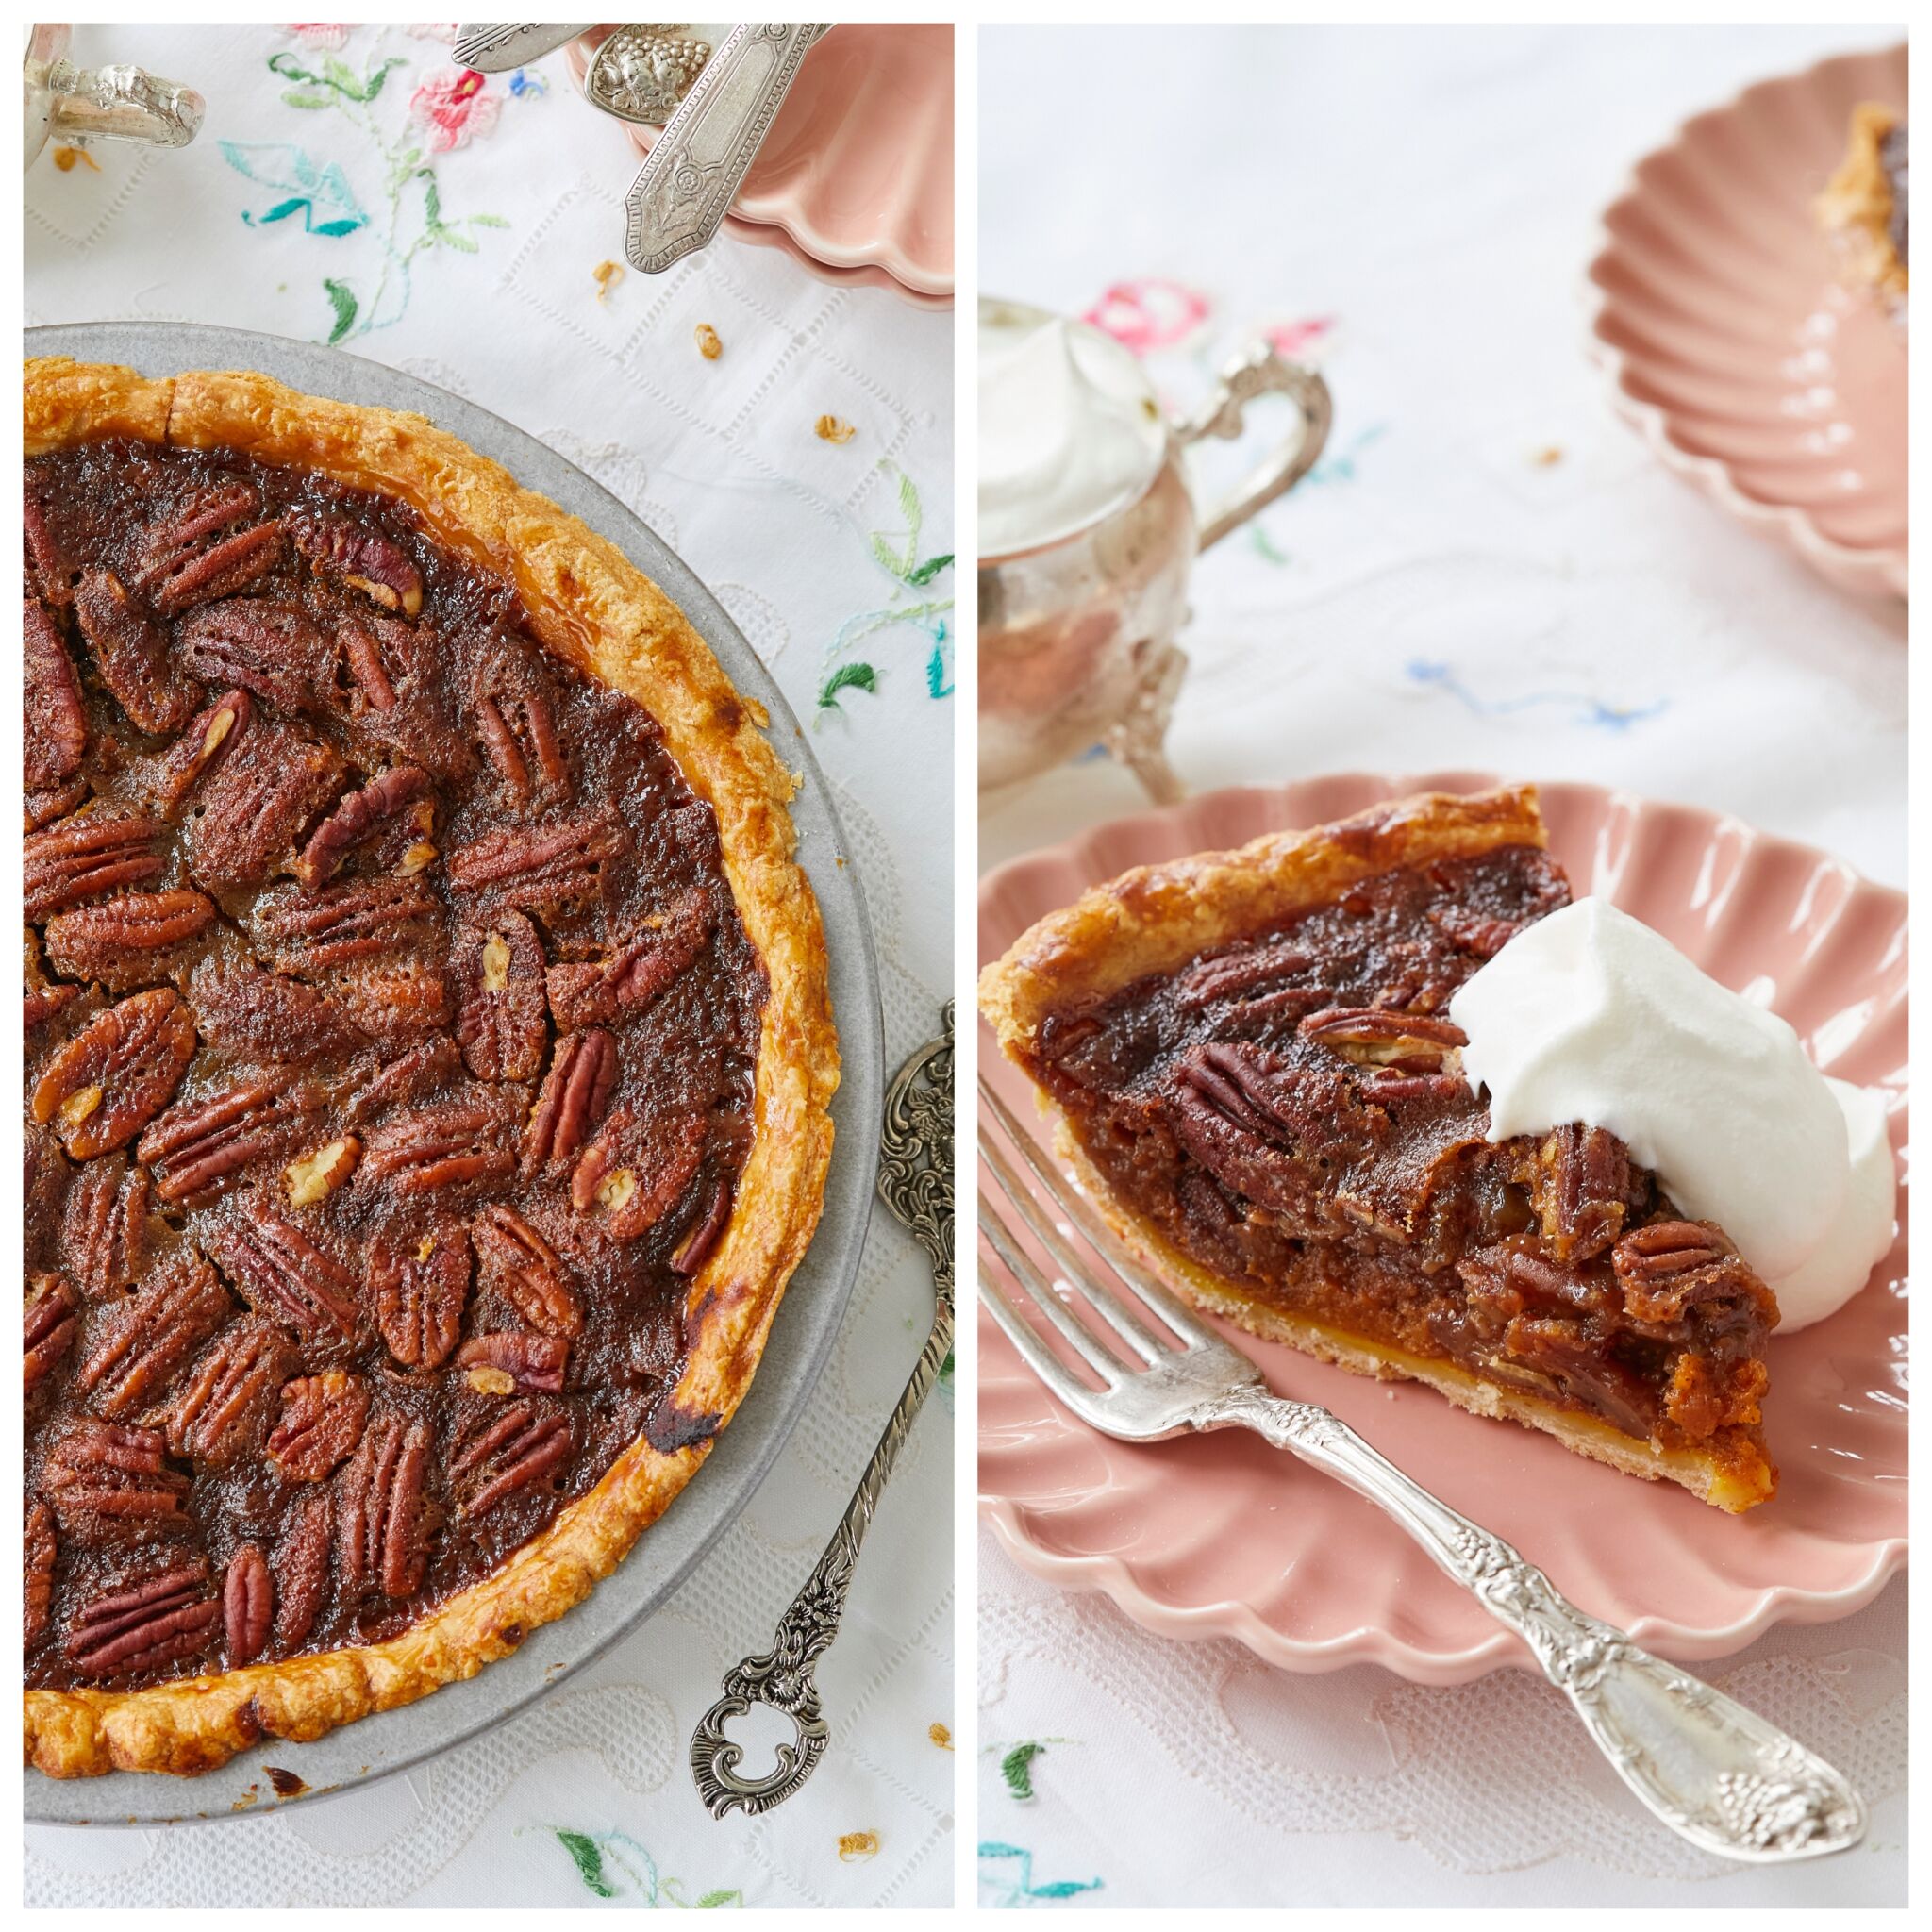 The Best-Ever Pecan Pie that is made with this master crust has golden edges, flaky crust and is loaded with pecans and topped with a dollop of whipped cream. 